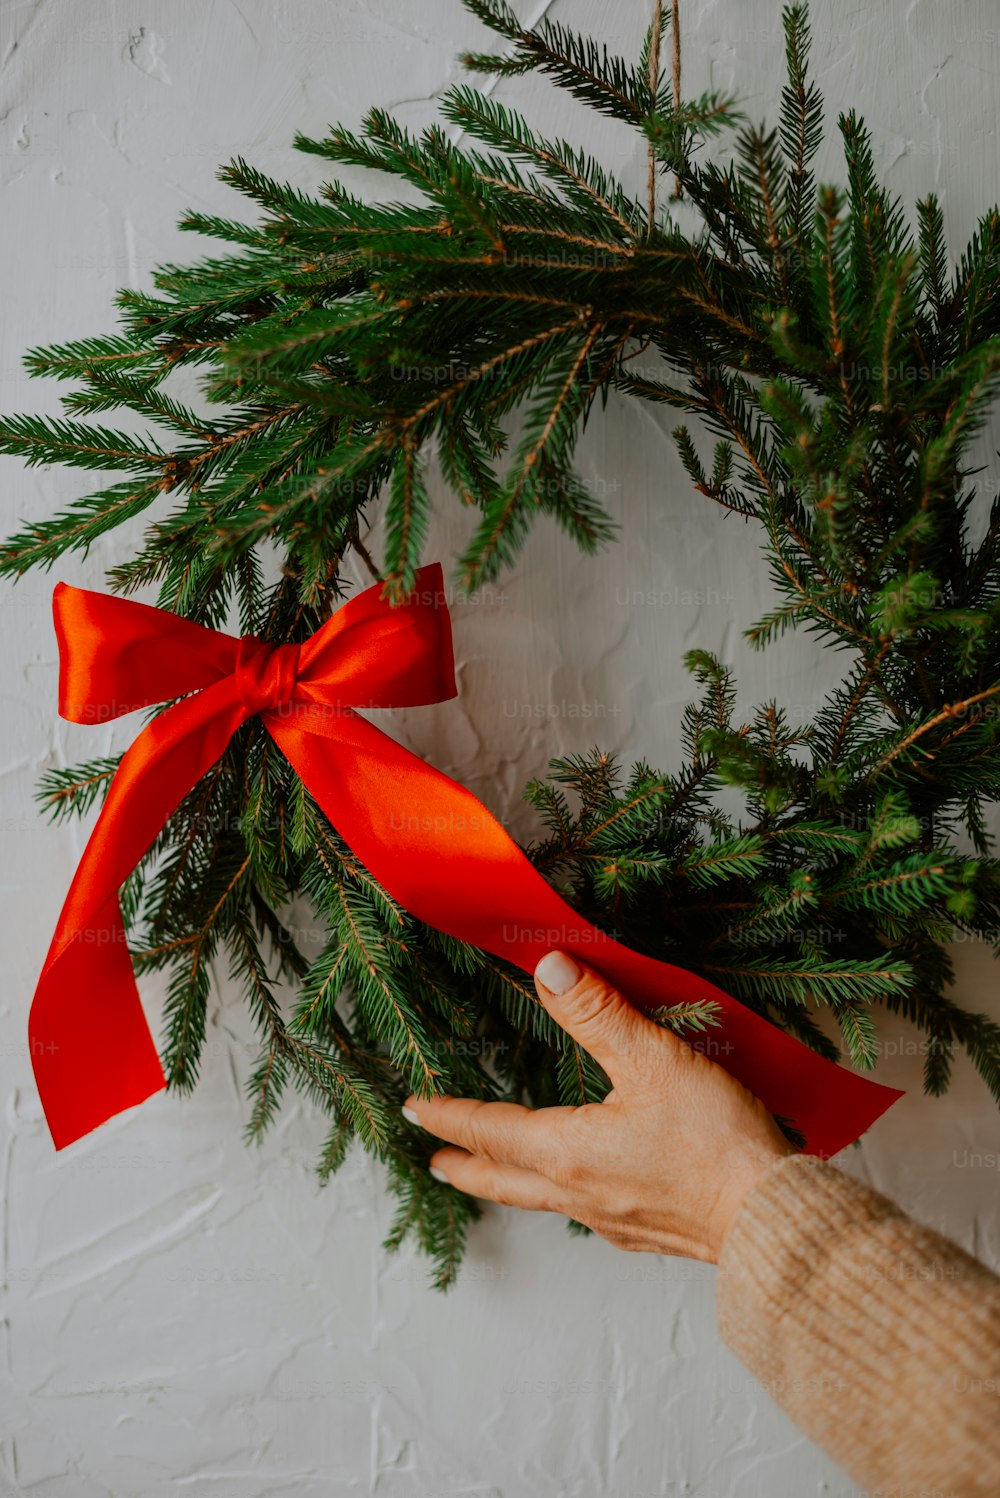 a person holding a red ribbon on a wreath